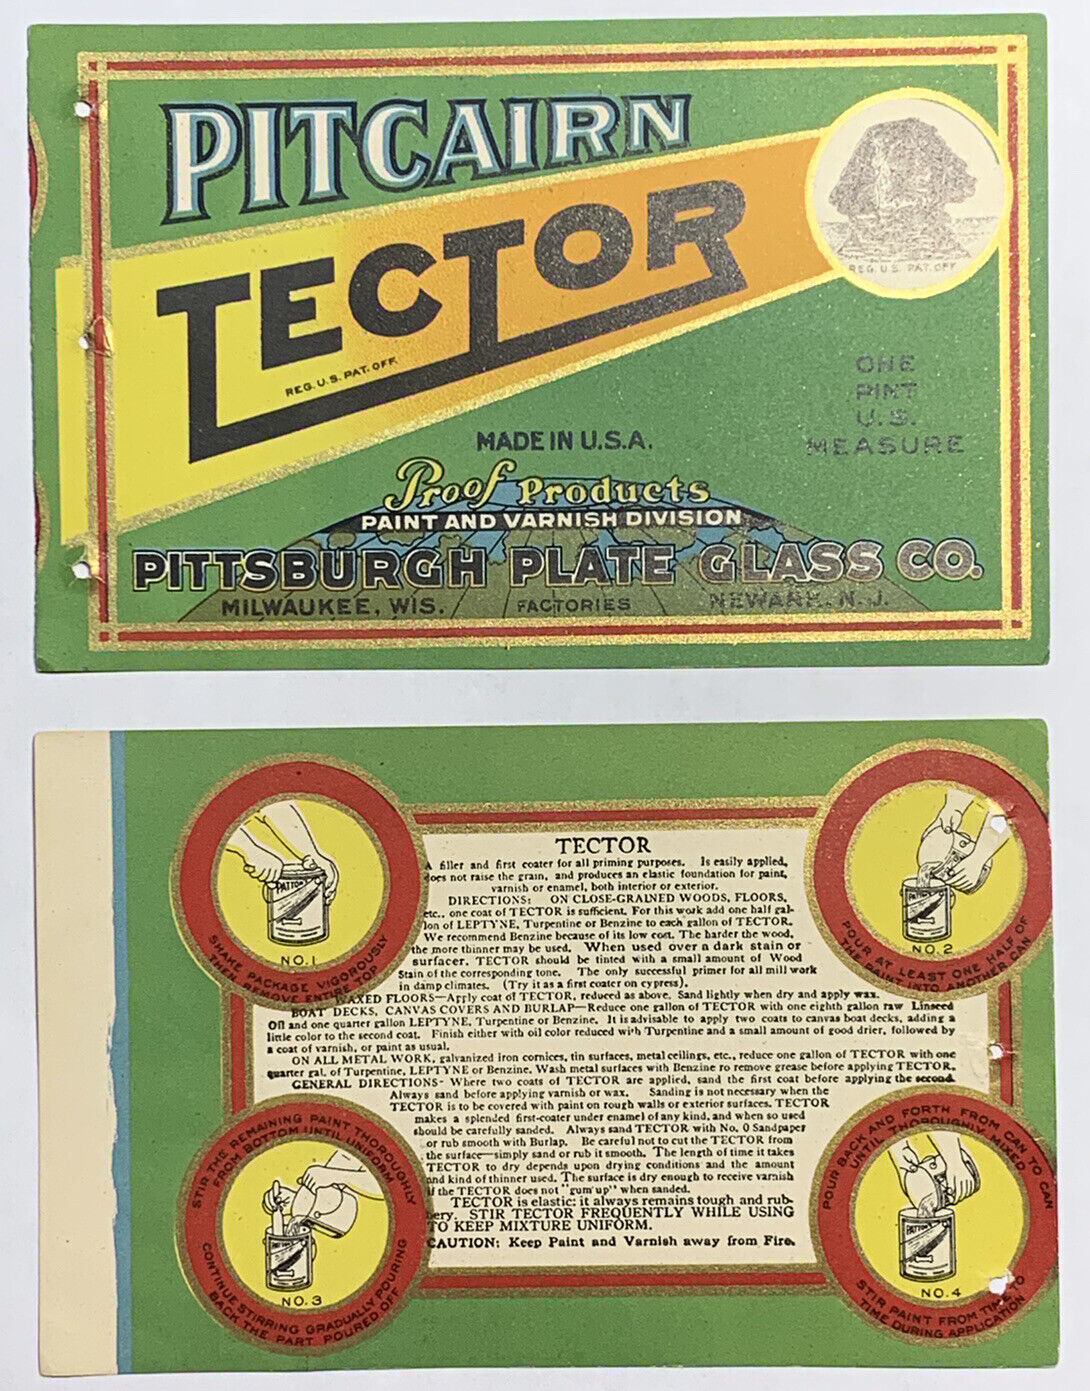 ANTIQUE PITCAIRN TECTOR PAINT VARNISH PITTSBURGH PLATE GLASS CO. PRODUCT LABELS